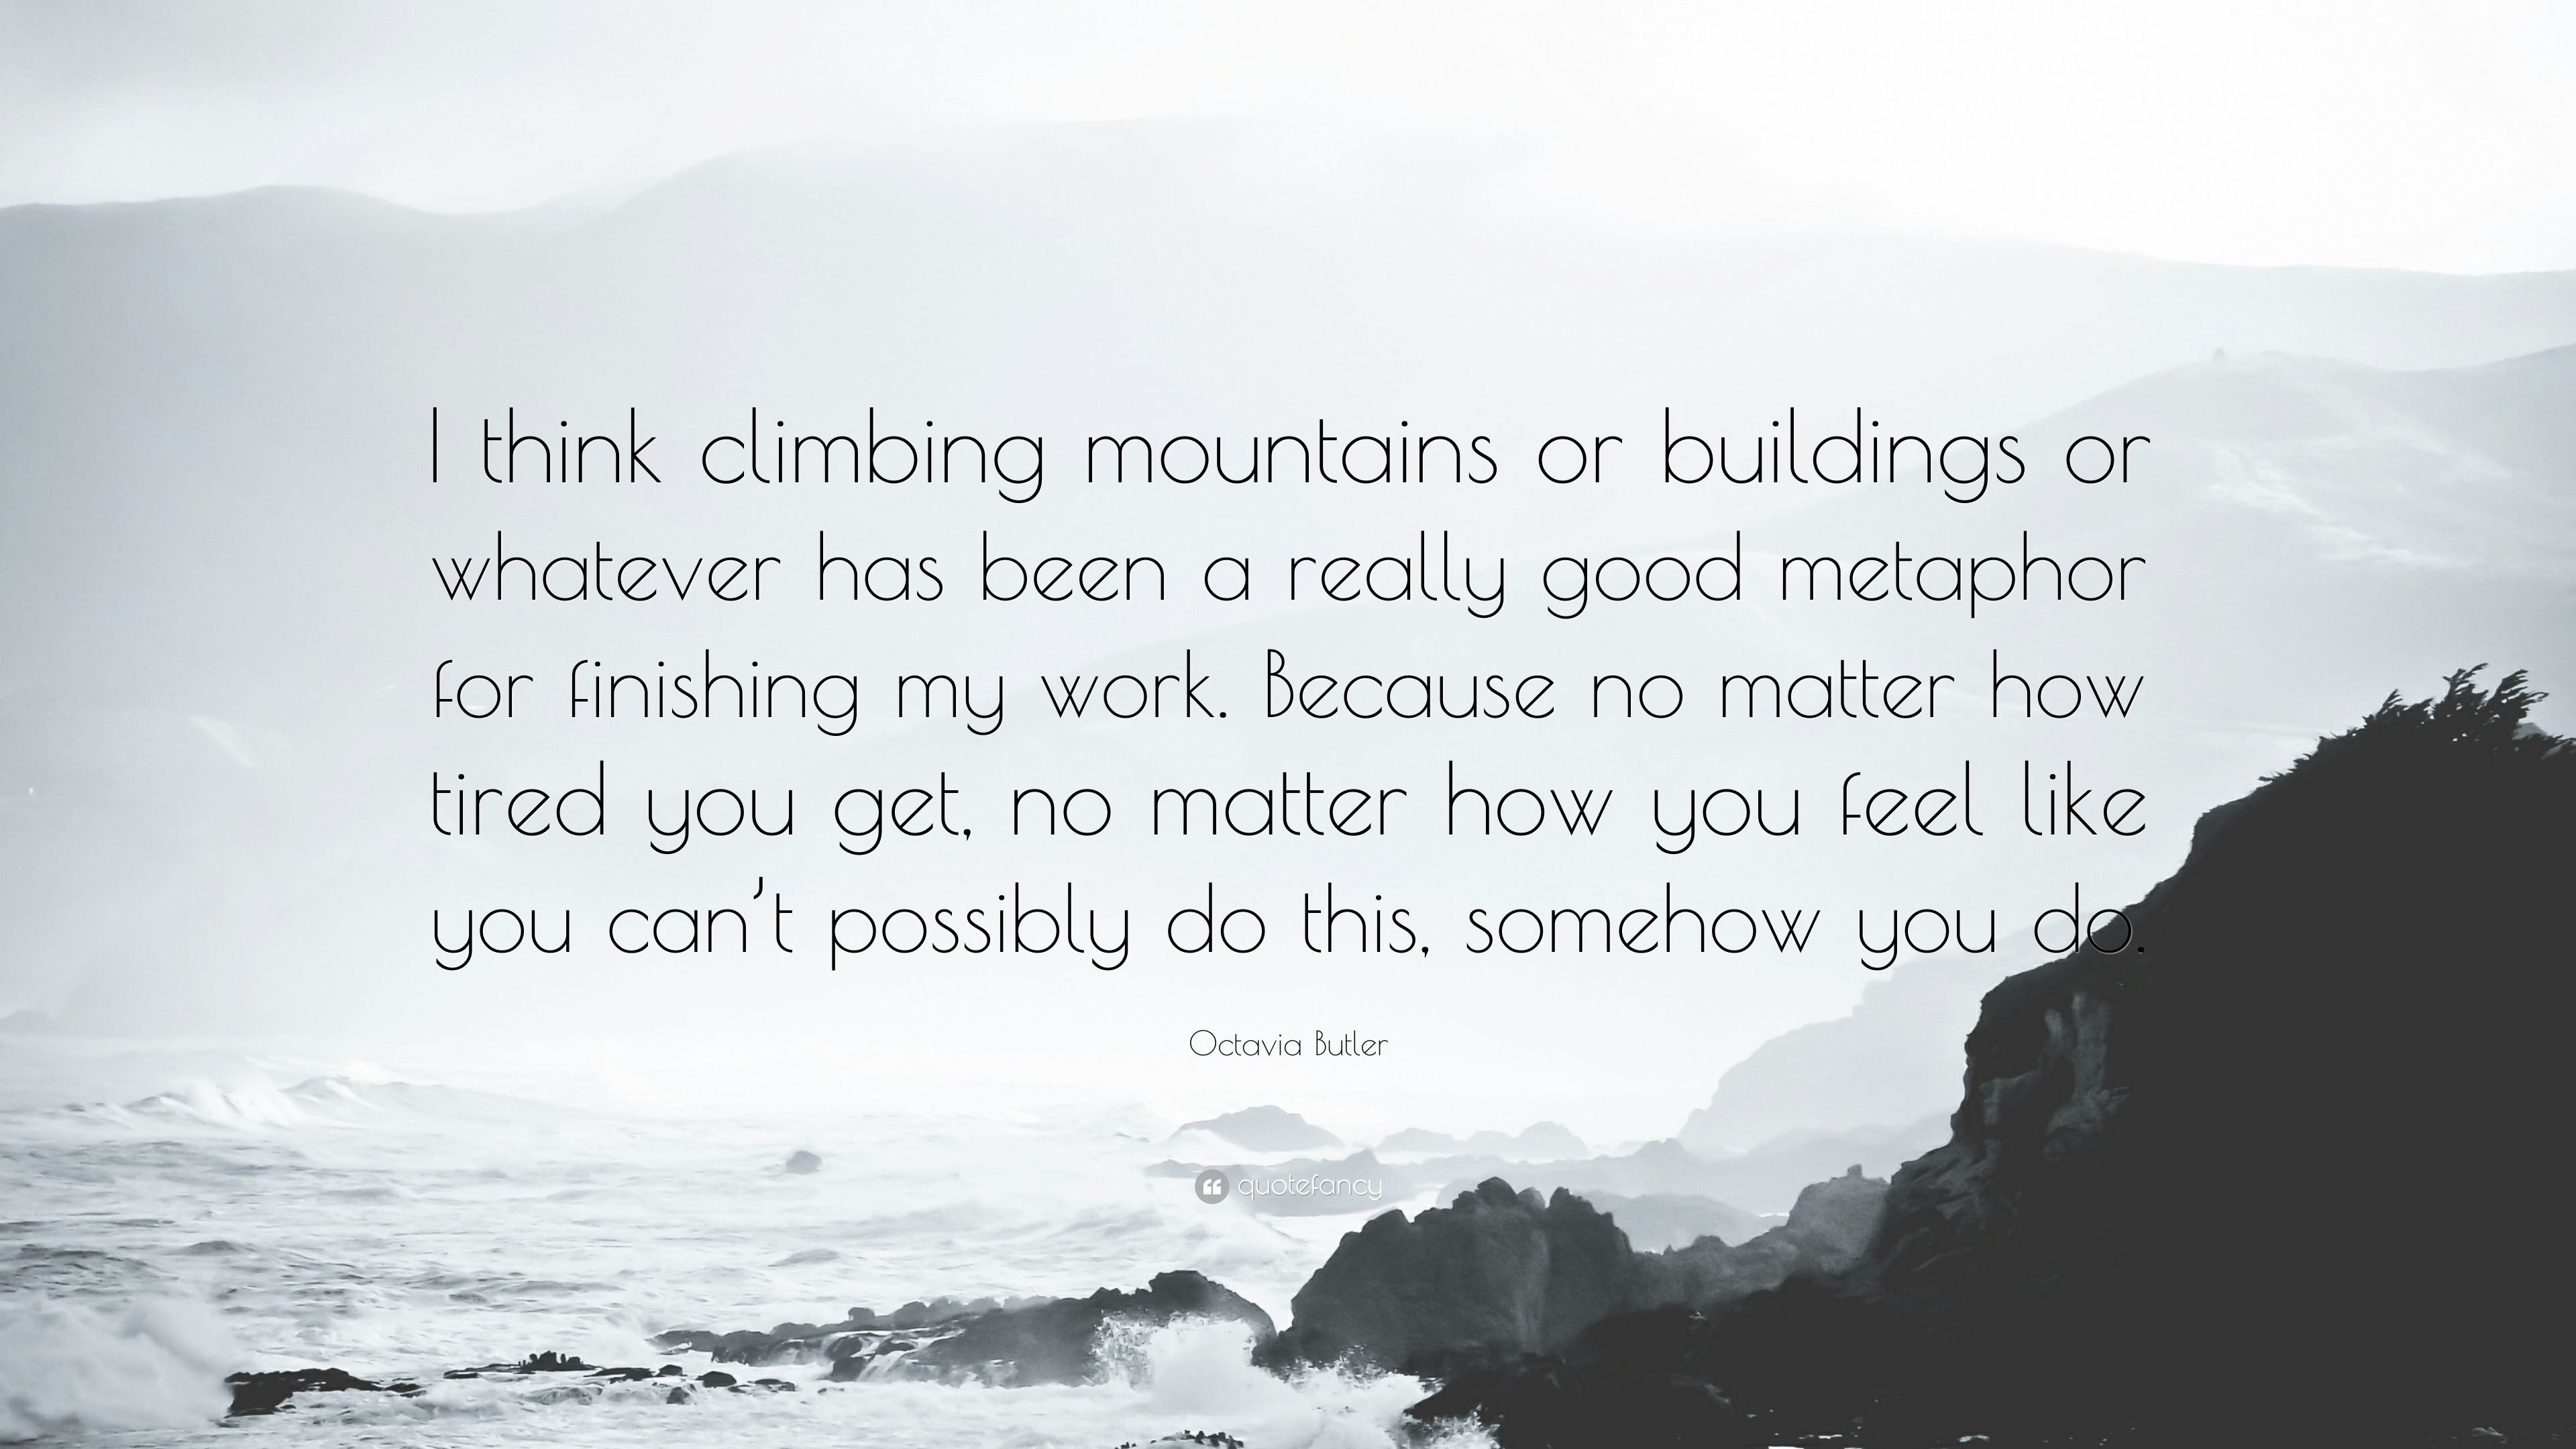 Octavia Butler Quote: “I think climbing mountains or buildings or